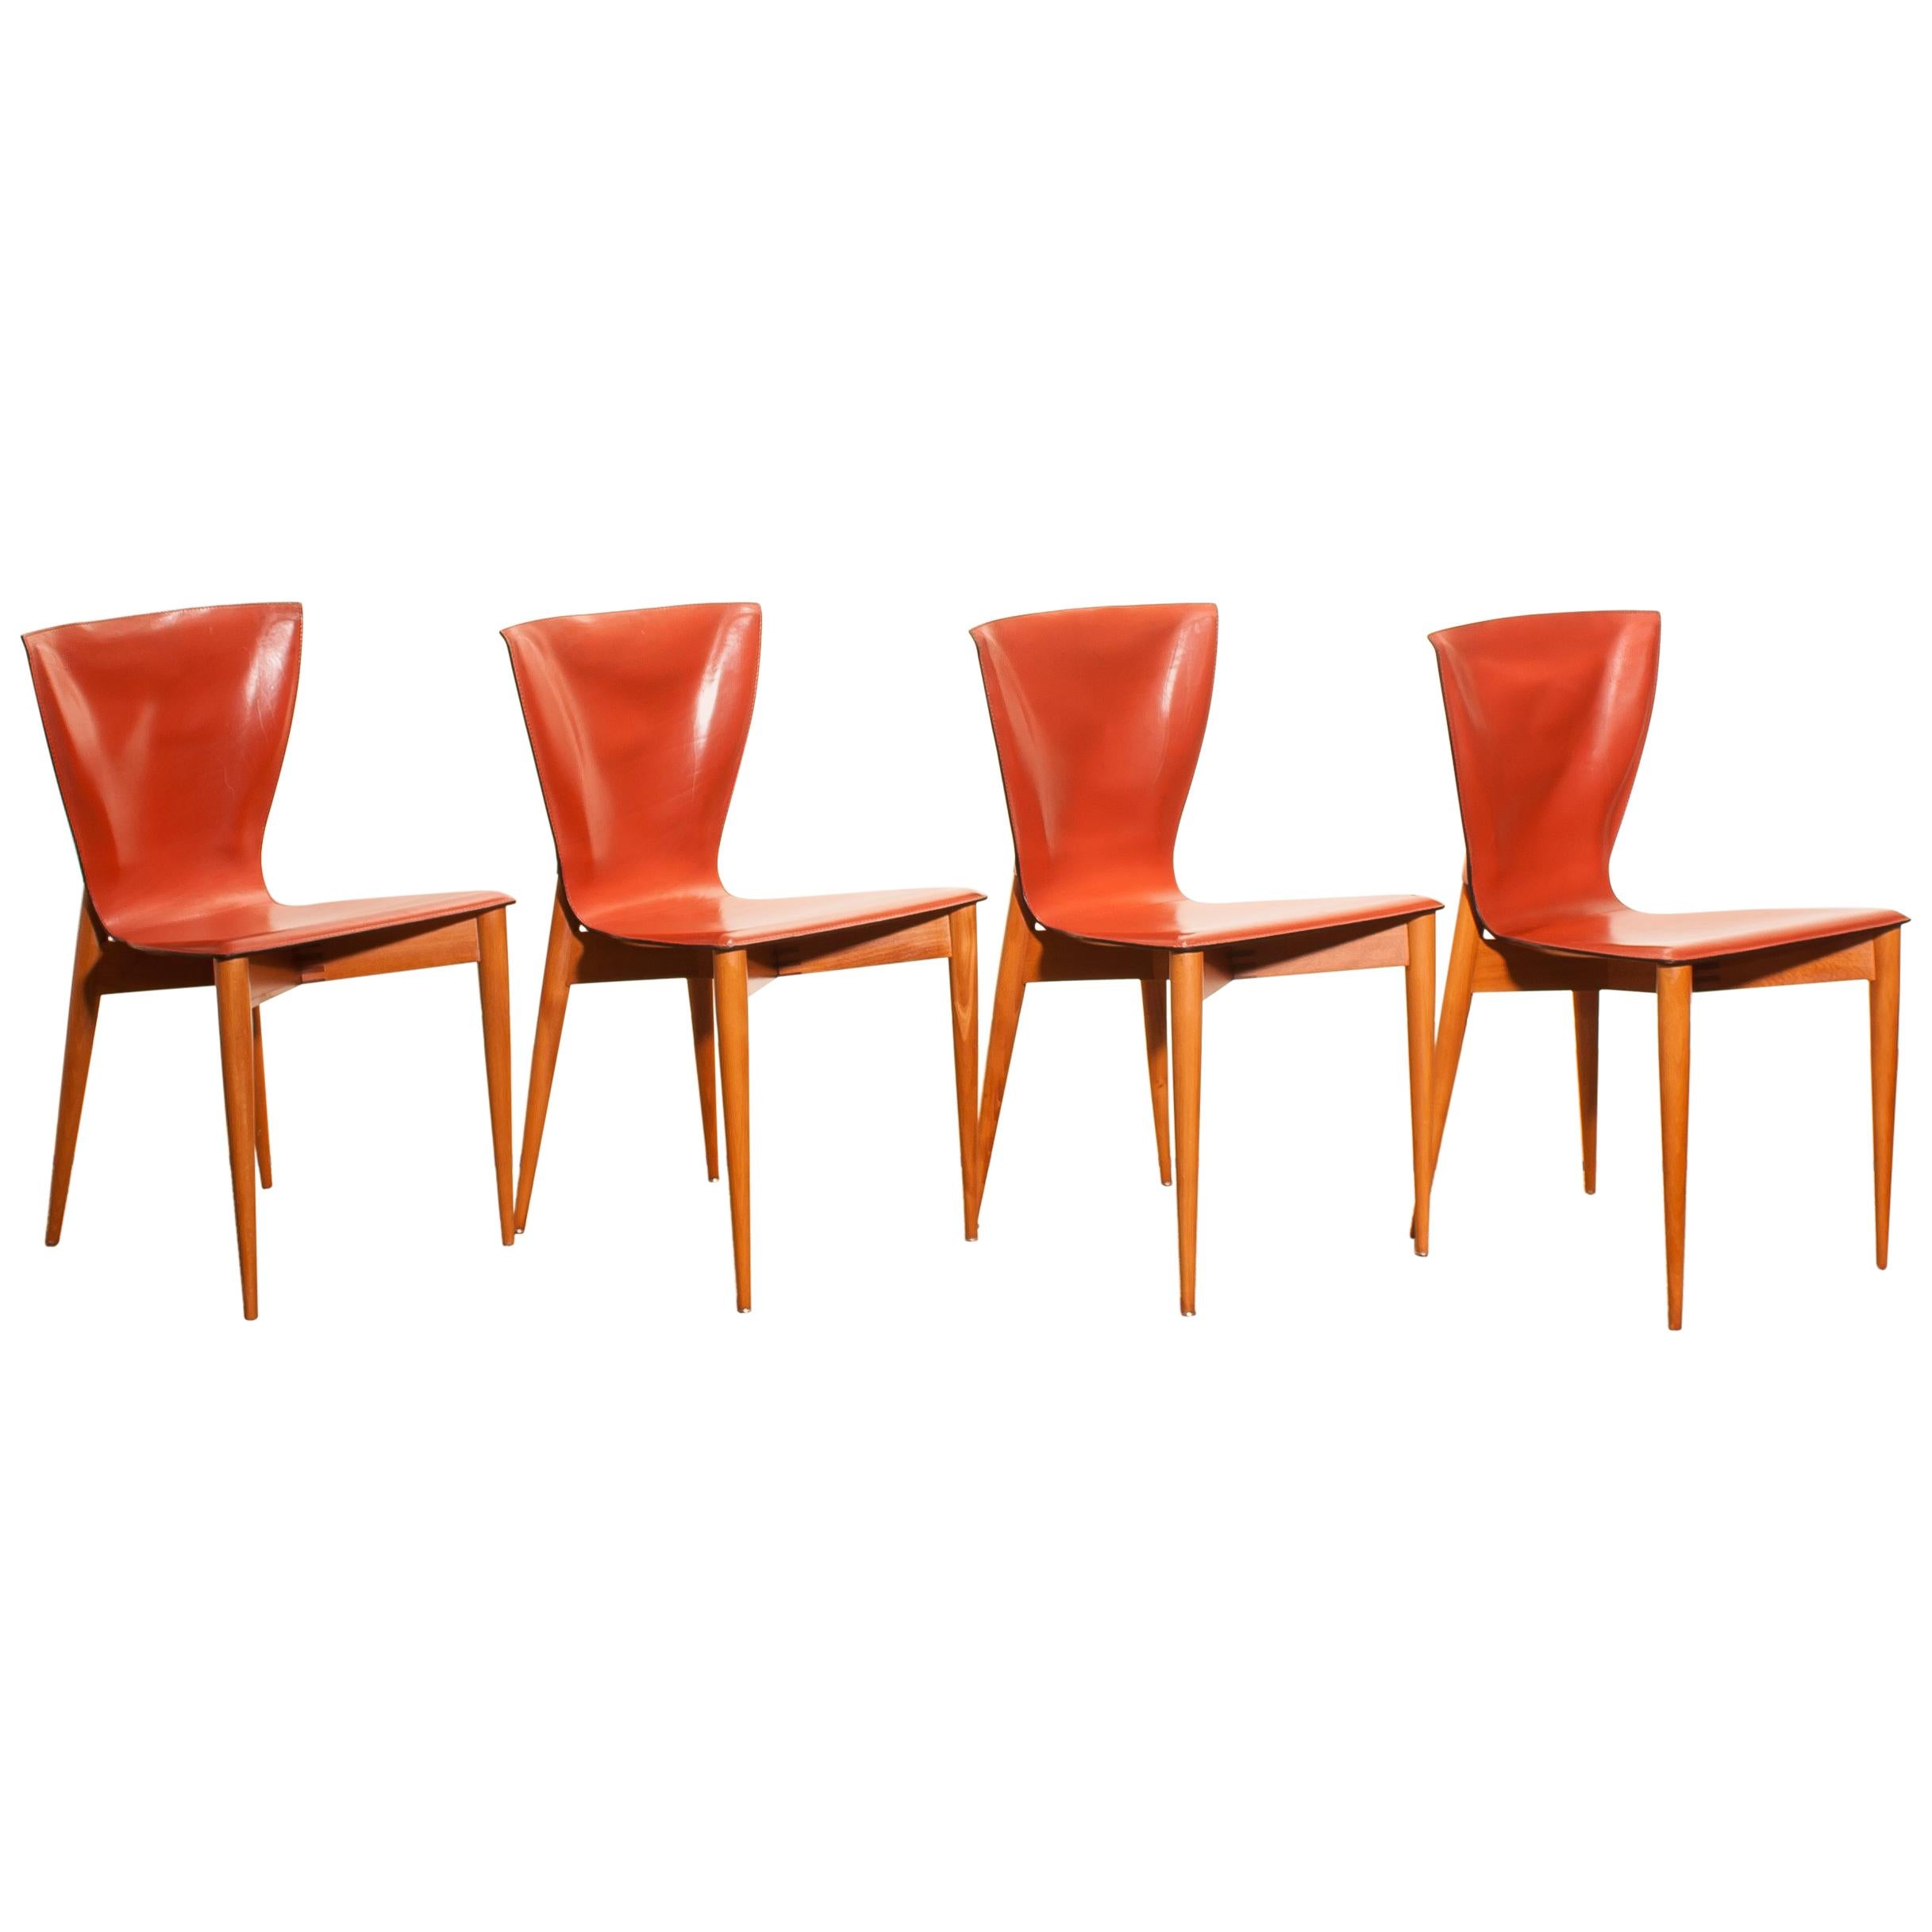 1970s, Set of Four 'Vela' Dining Chairs by Carlo Bartoli for Matteo Grassi